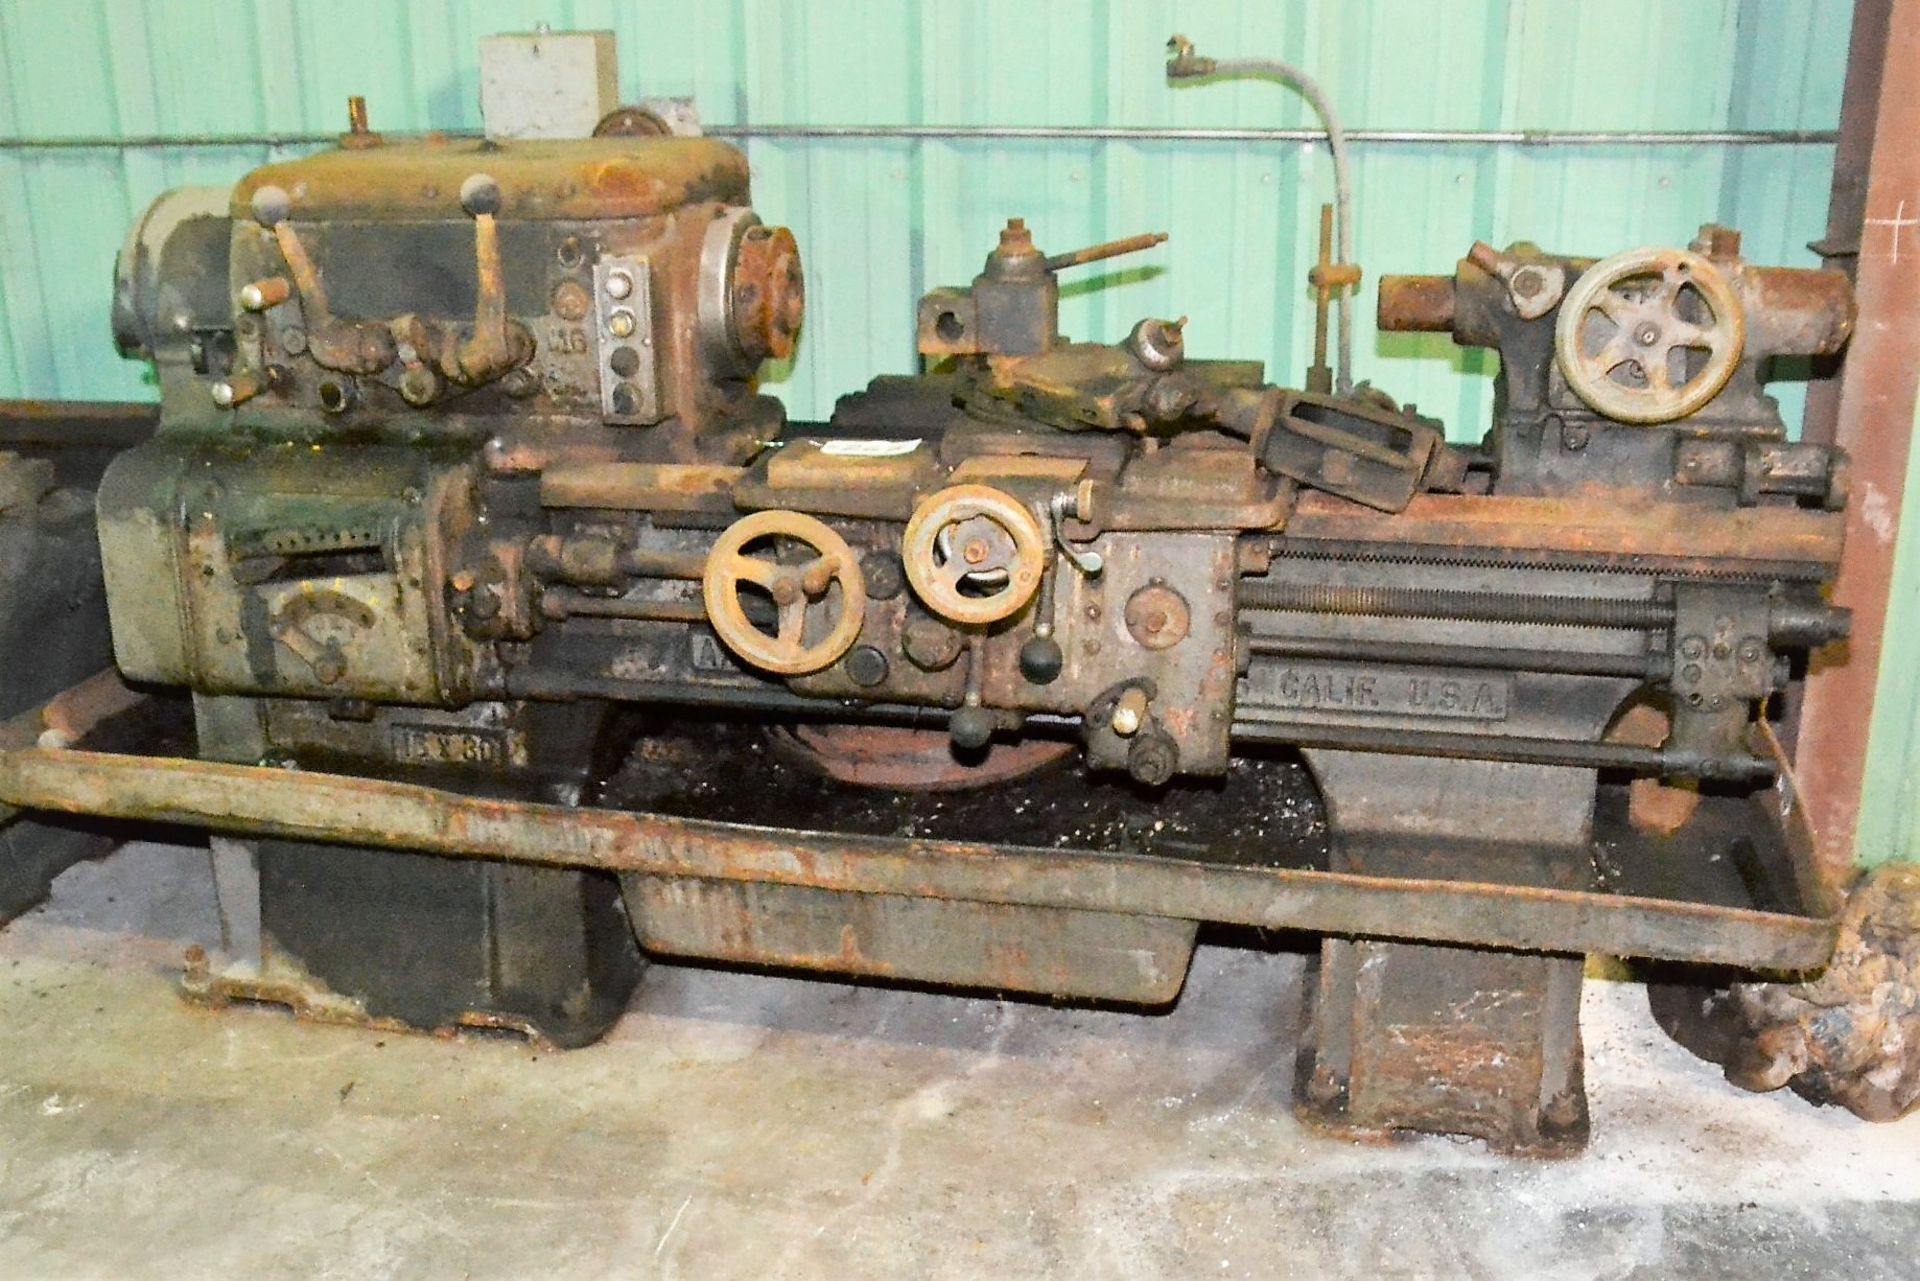 AXELSON ENGINE LATHE, 16” X 30” , S/N 3931, (PARTS MACHINE) (LOCATION: 2622 Martinville Dr,